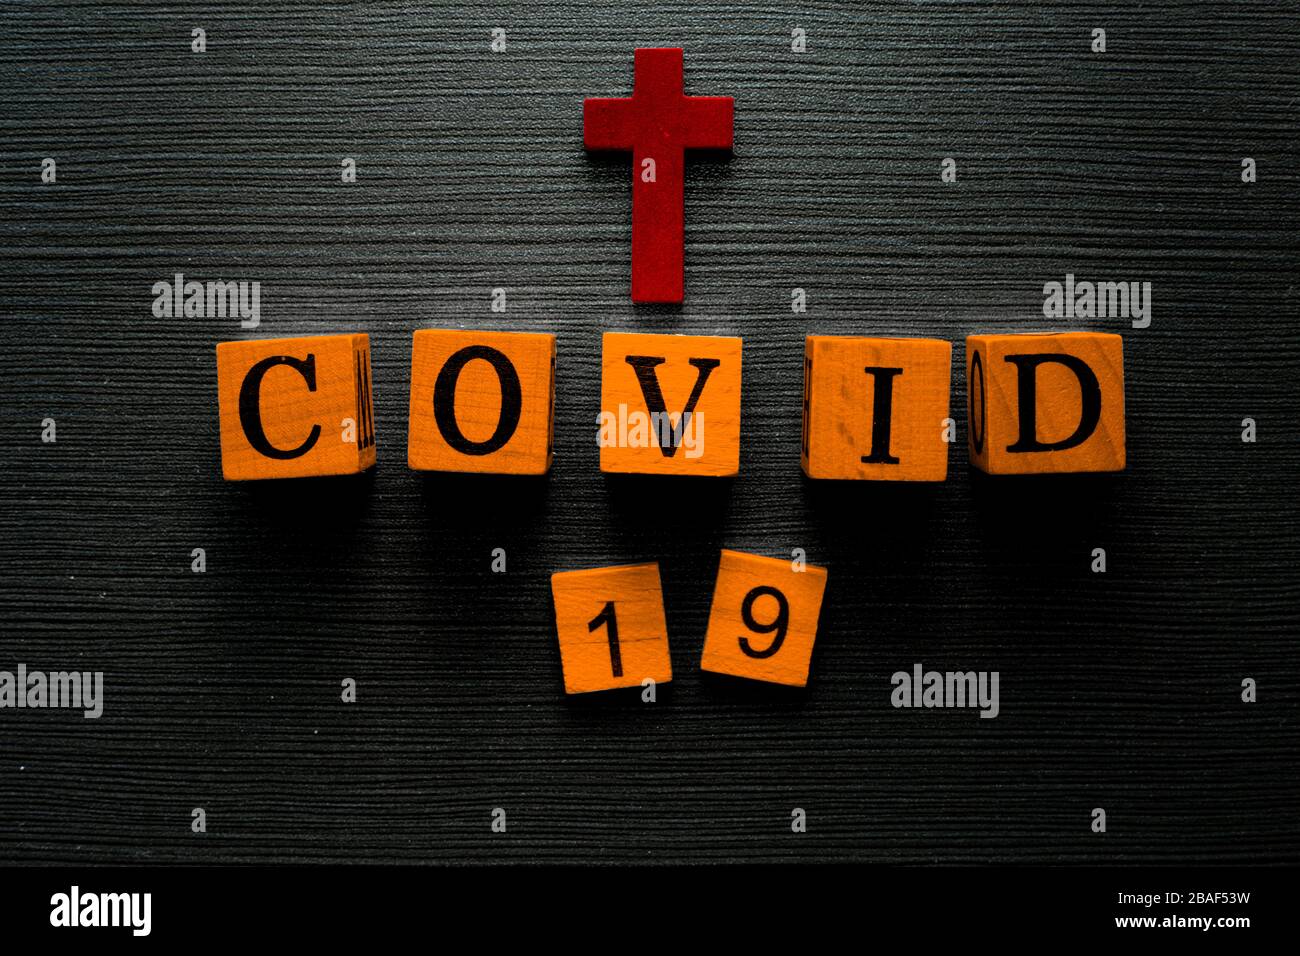 COVID-19 name of Corona virus from Wuhan text word on drak wood background. Stock Photo